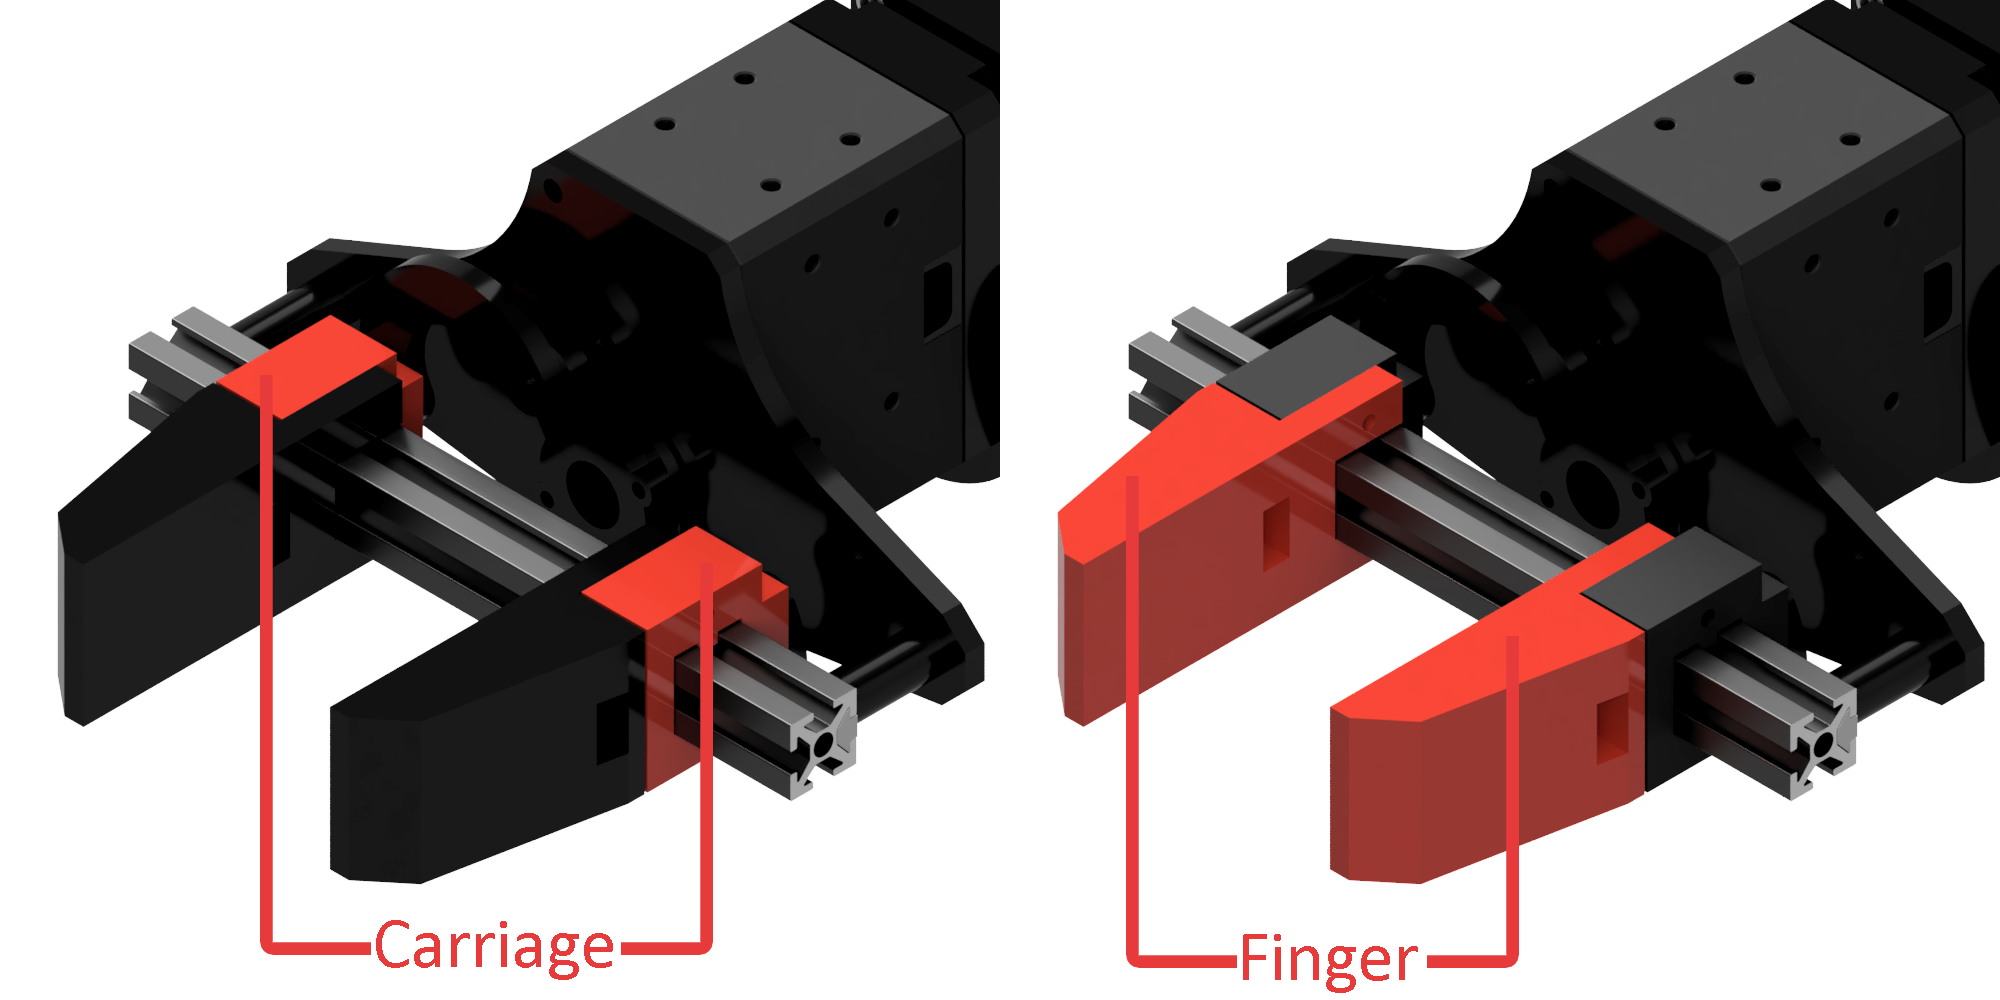 Image describing the difference between a the gripper carriage and the gripper finger